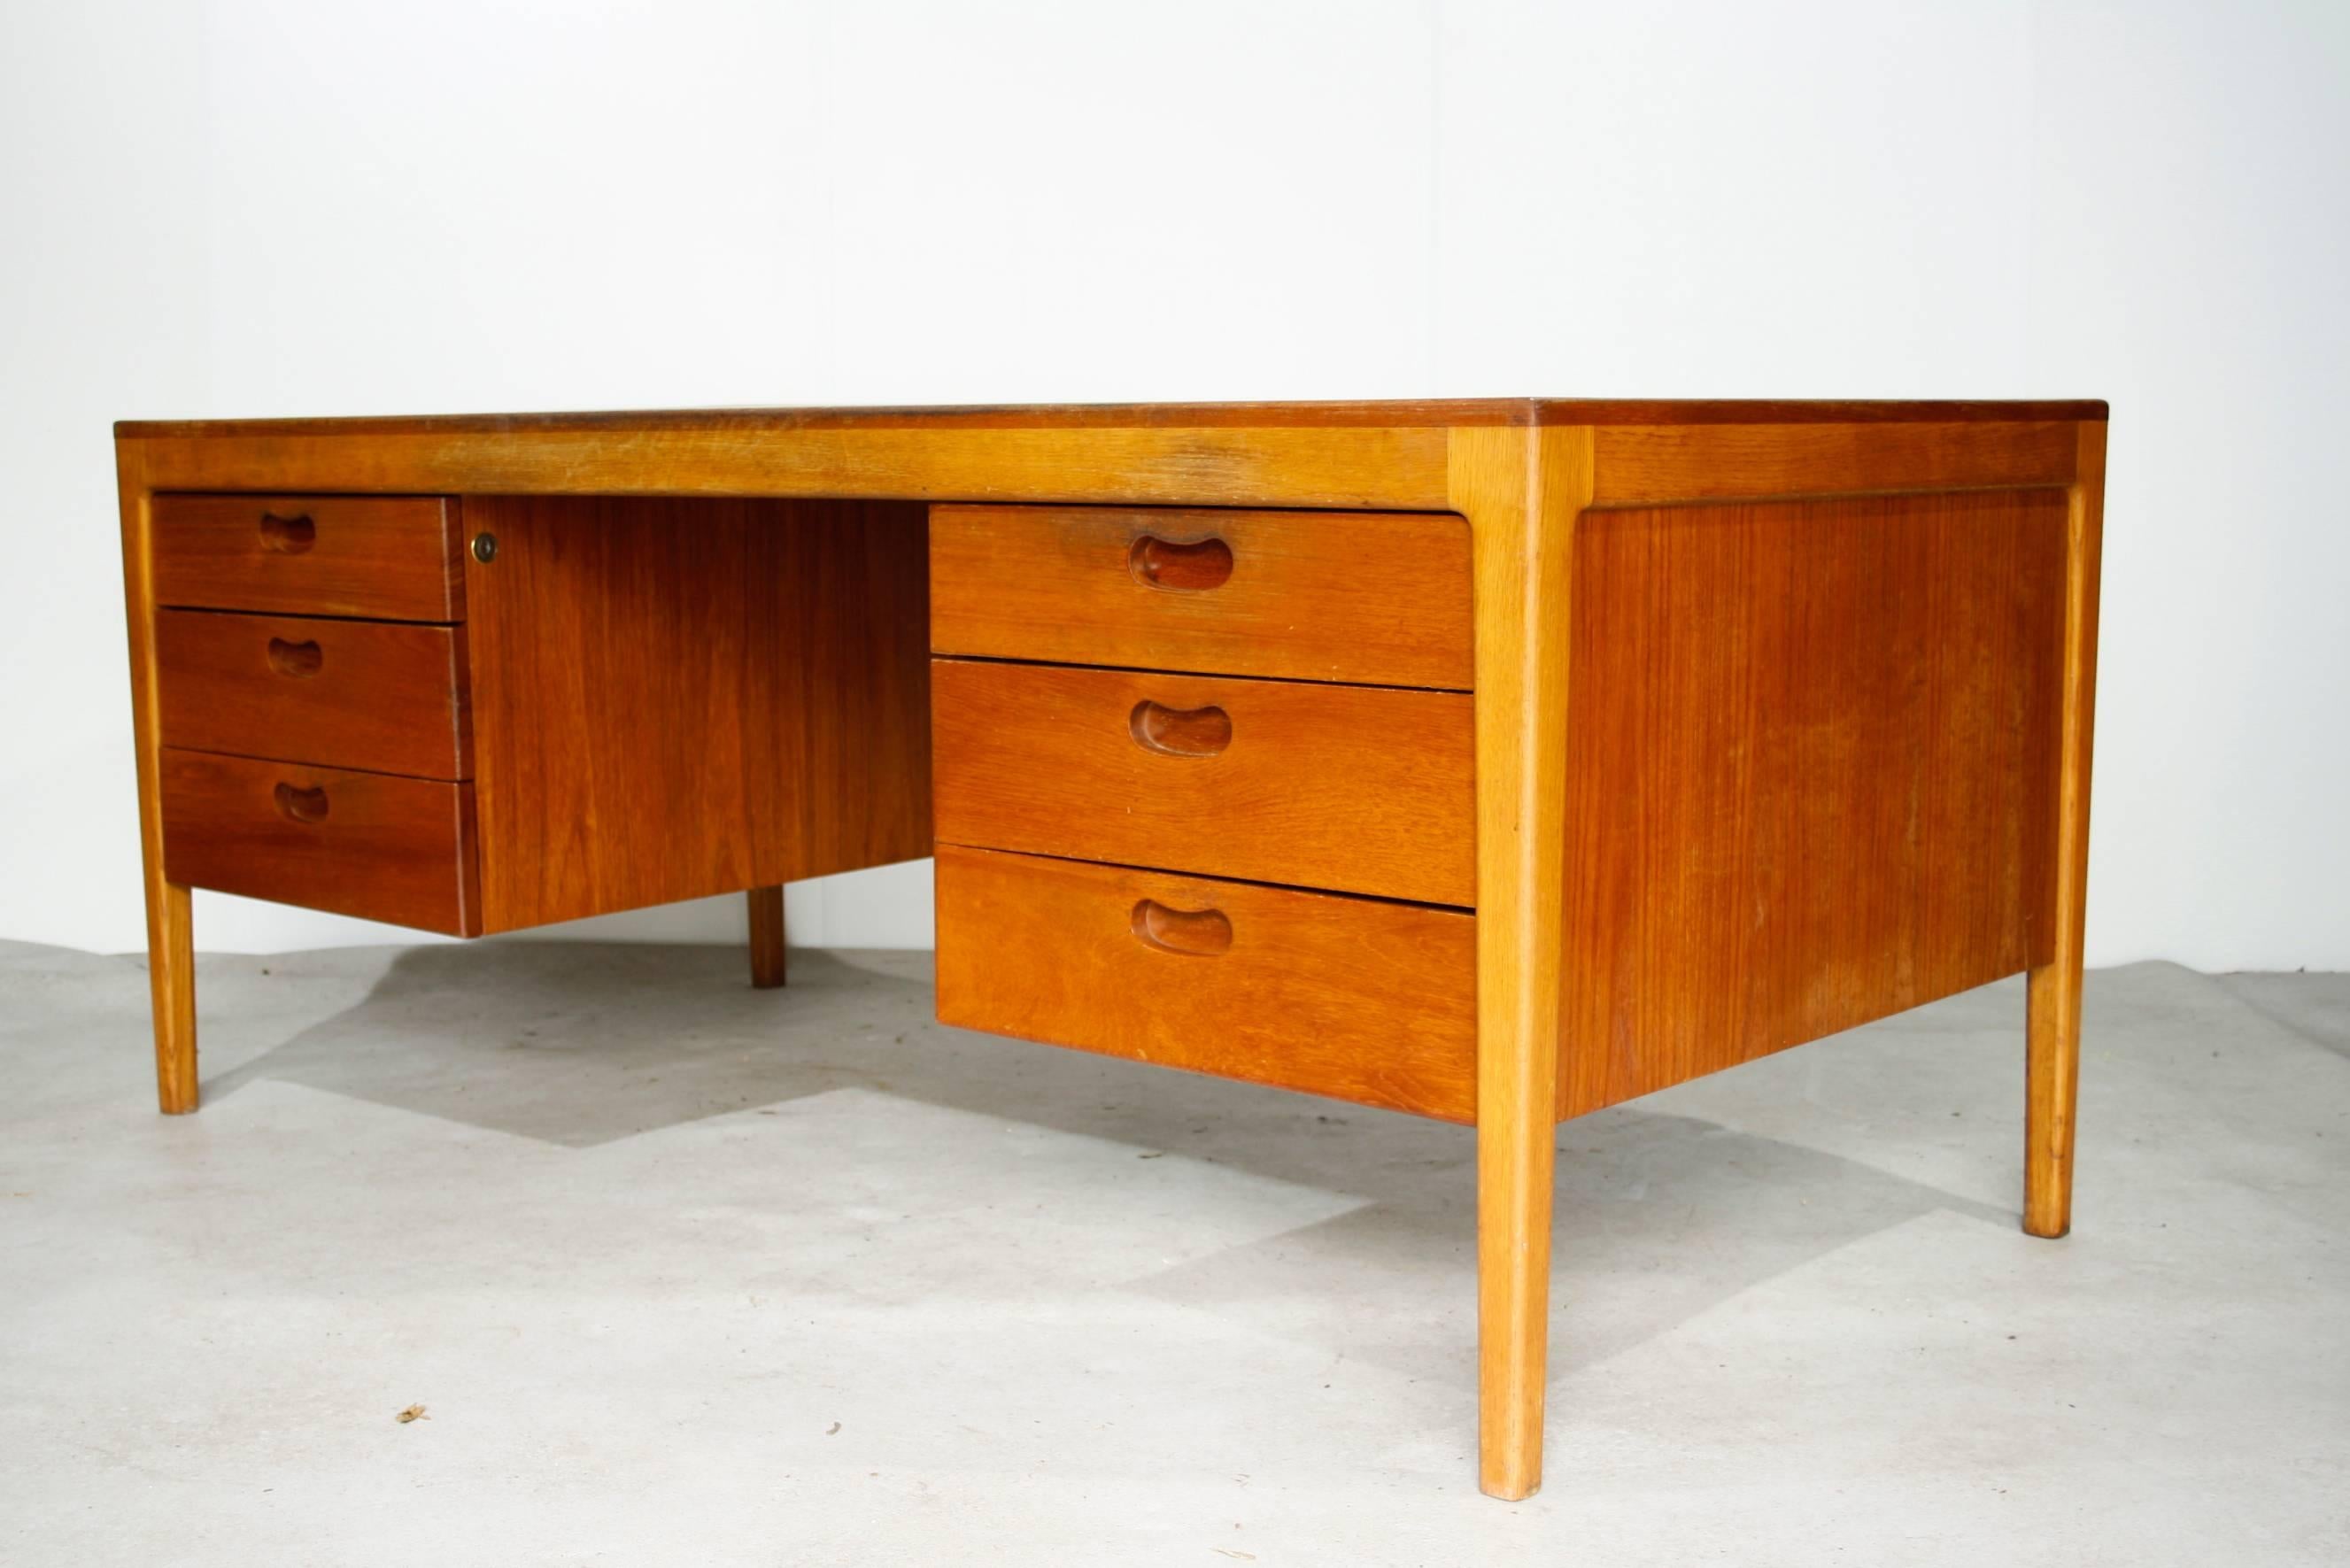 Large and heavy midcentury desk from Denmark with beautiful details.

This high quality desk is partly made of solid teak.

In good condition with normal traces of use.